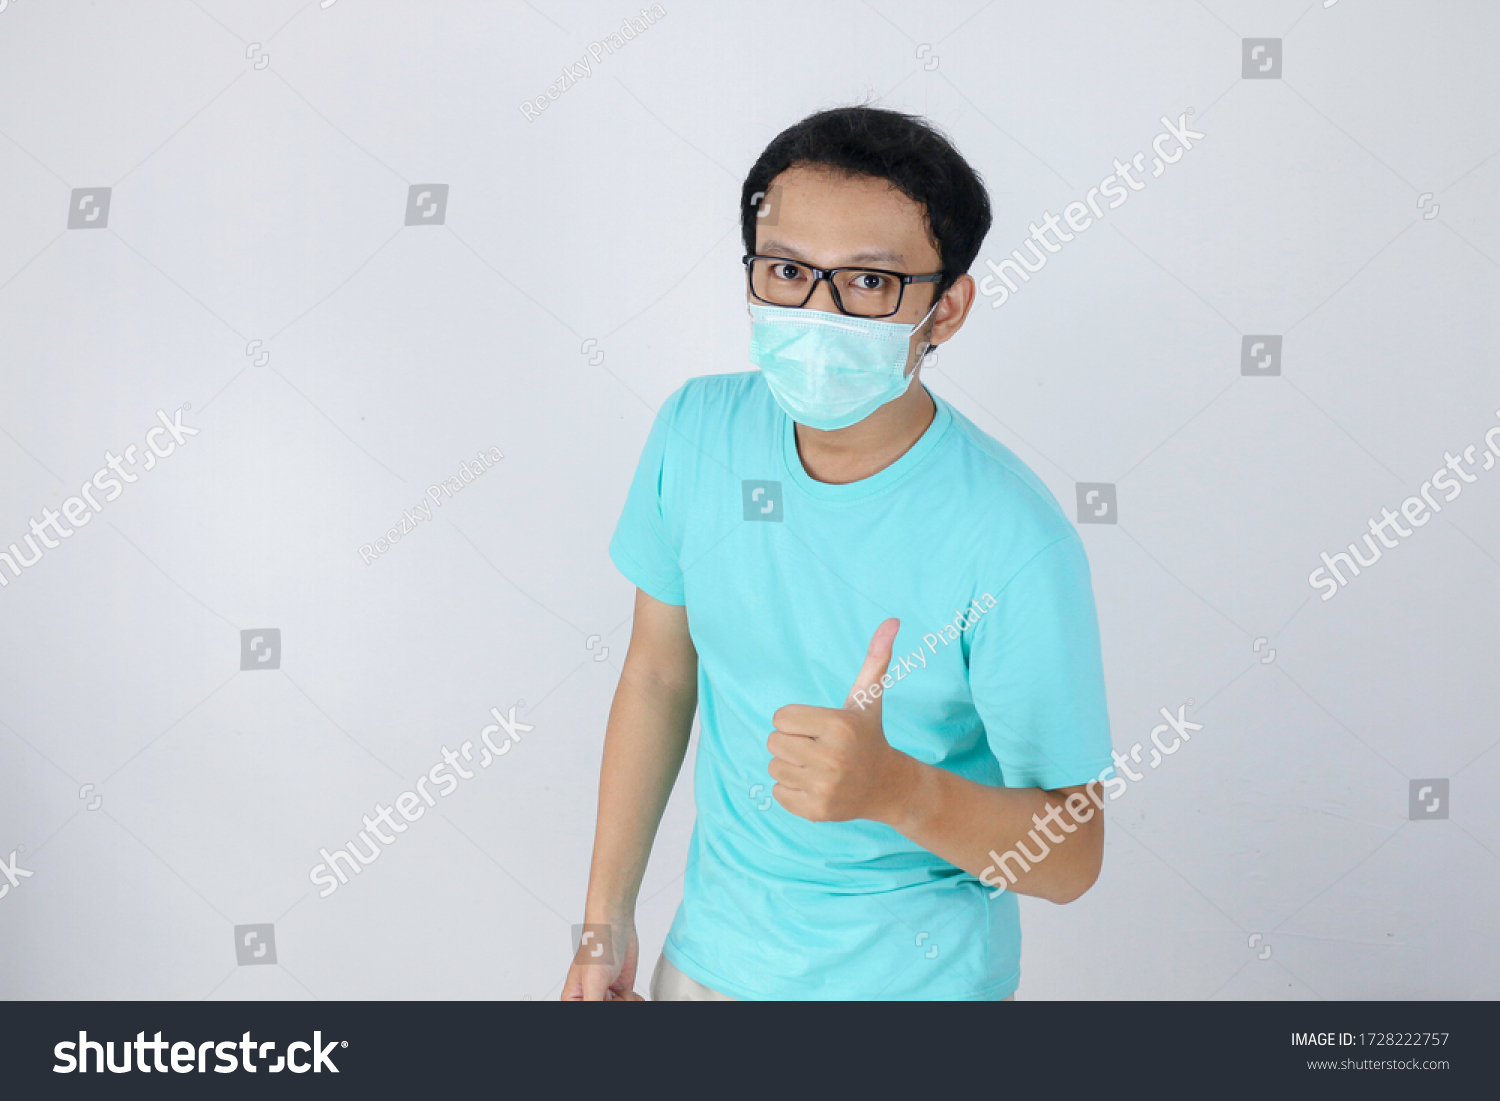 Young Asian Man wear medical mask is give ok hand sign with confident gestures. Indonesian man wearing blue shirt. #1728222757